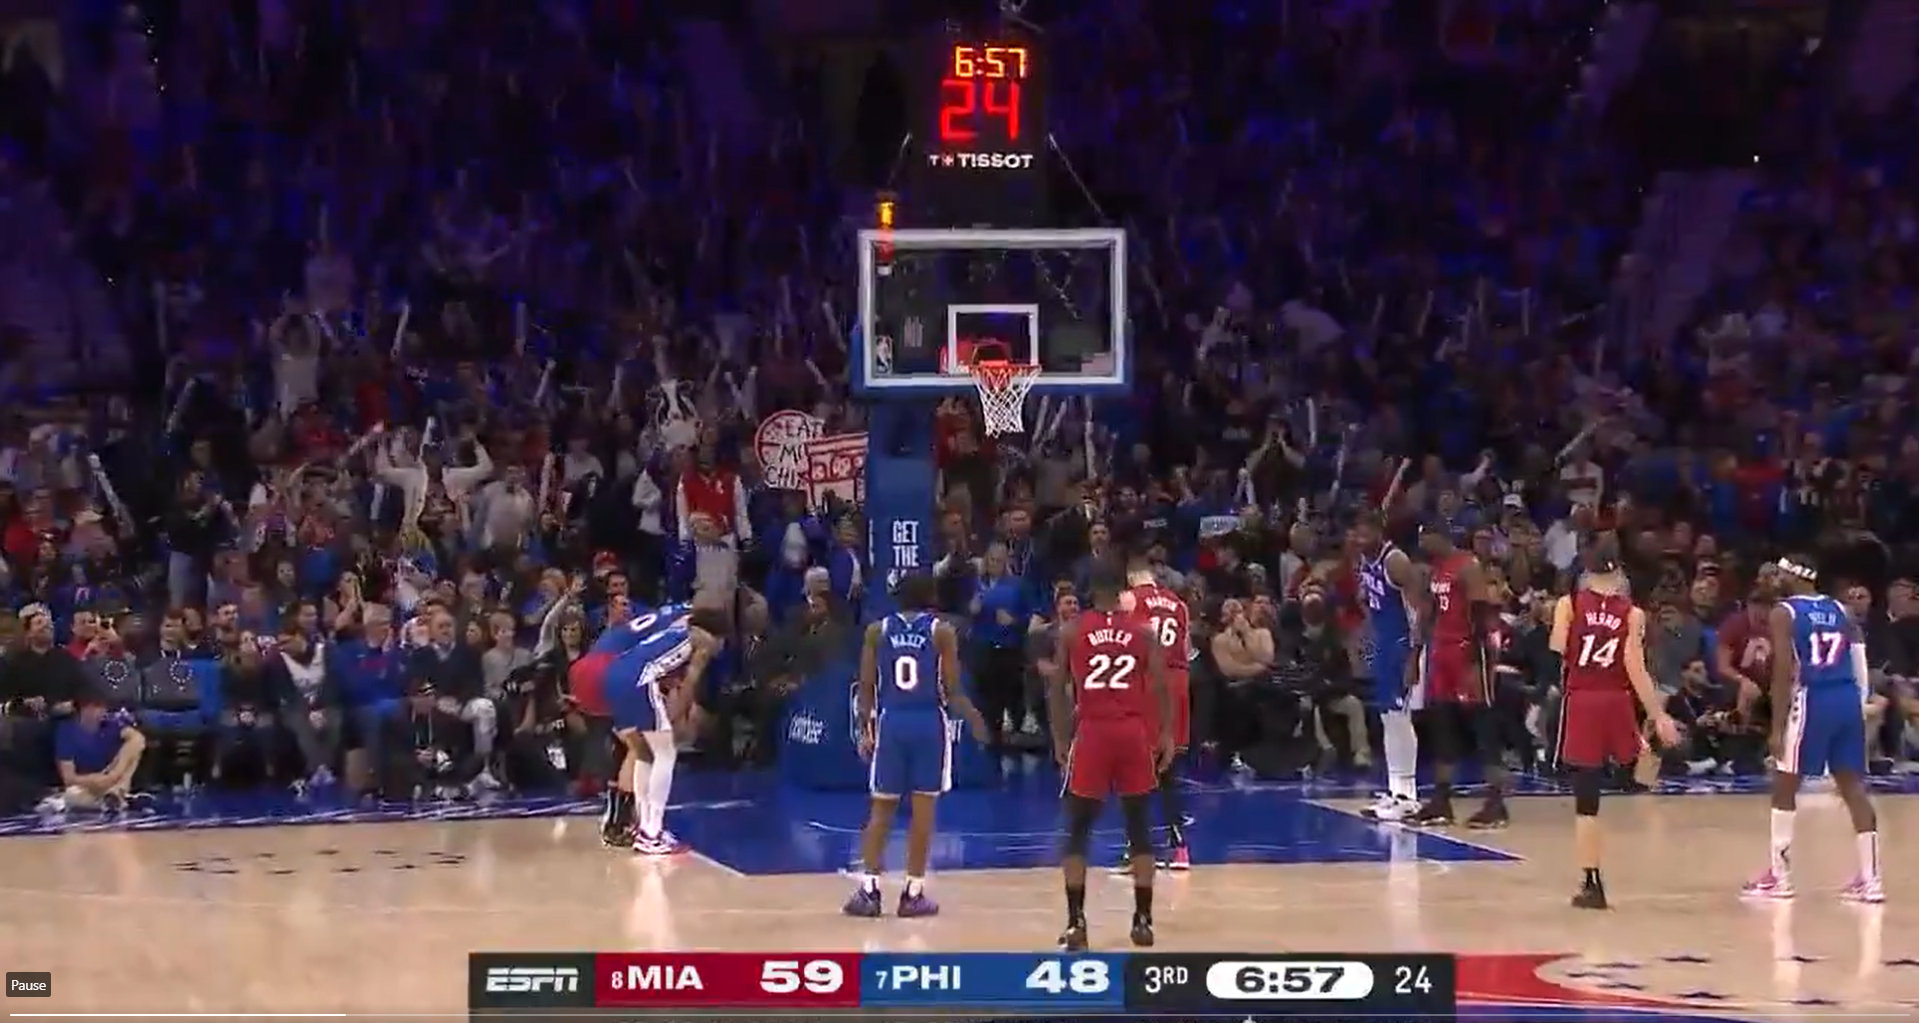 Philadelphia 76ers fans went nuts Wednesday night after a second missed free throw by Miami's Caleb Martin won them free Chick-fil-A.. Photo Credit: ESPN